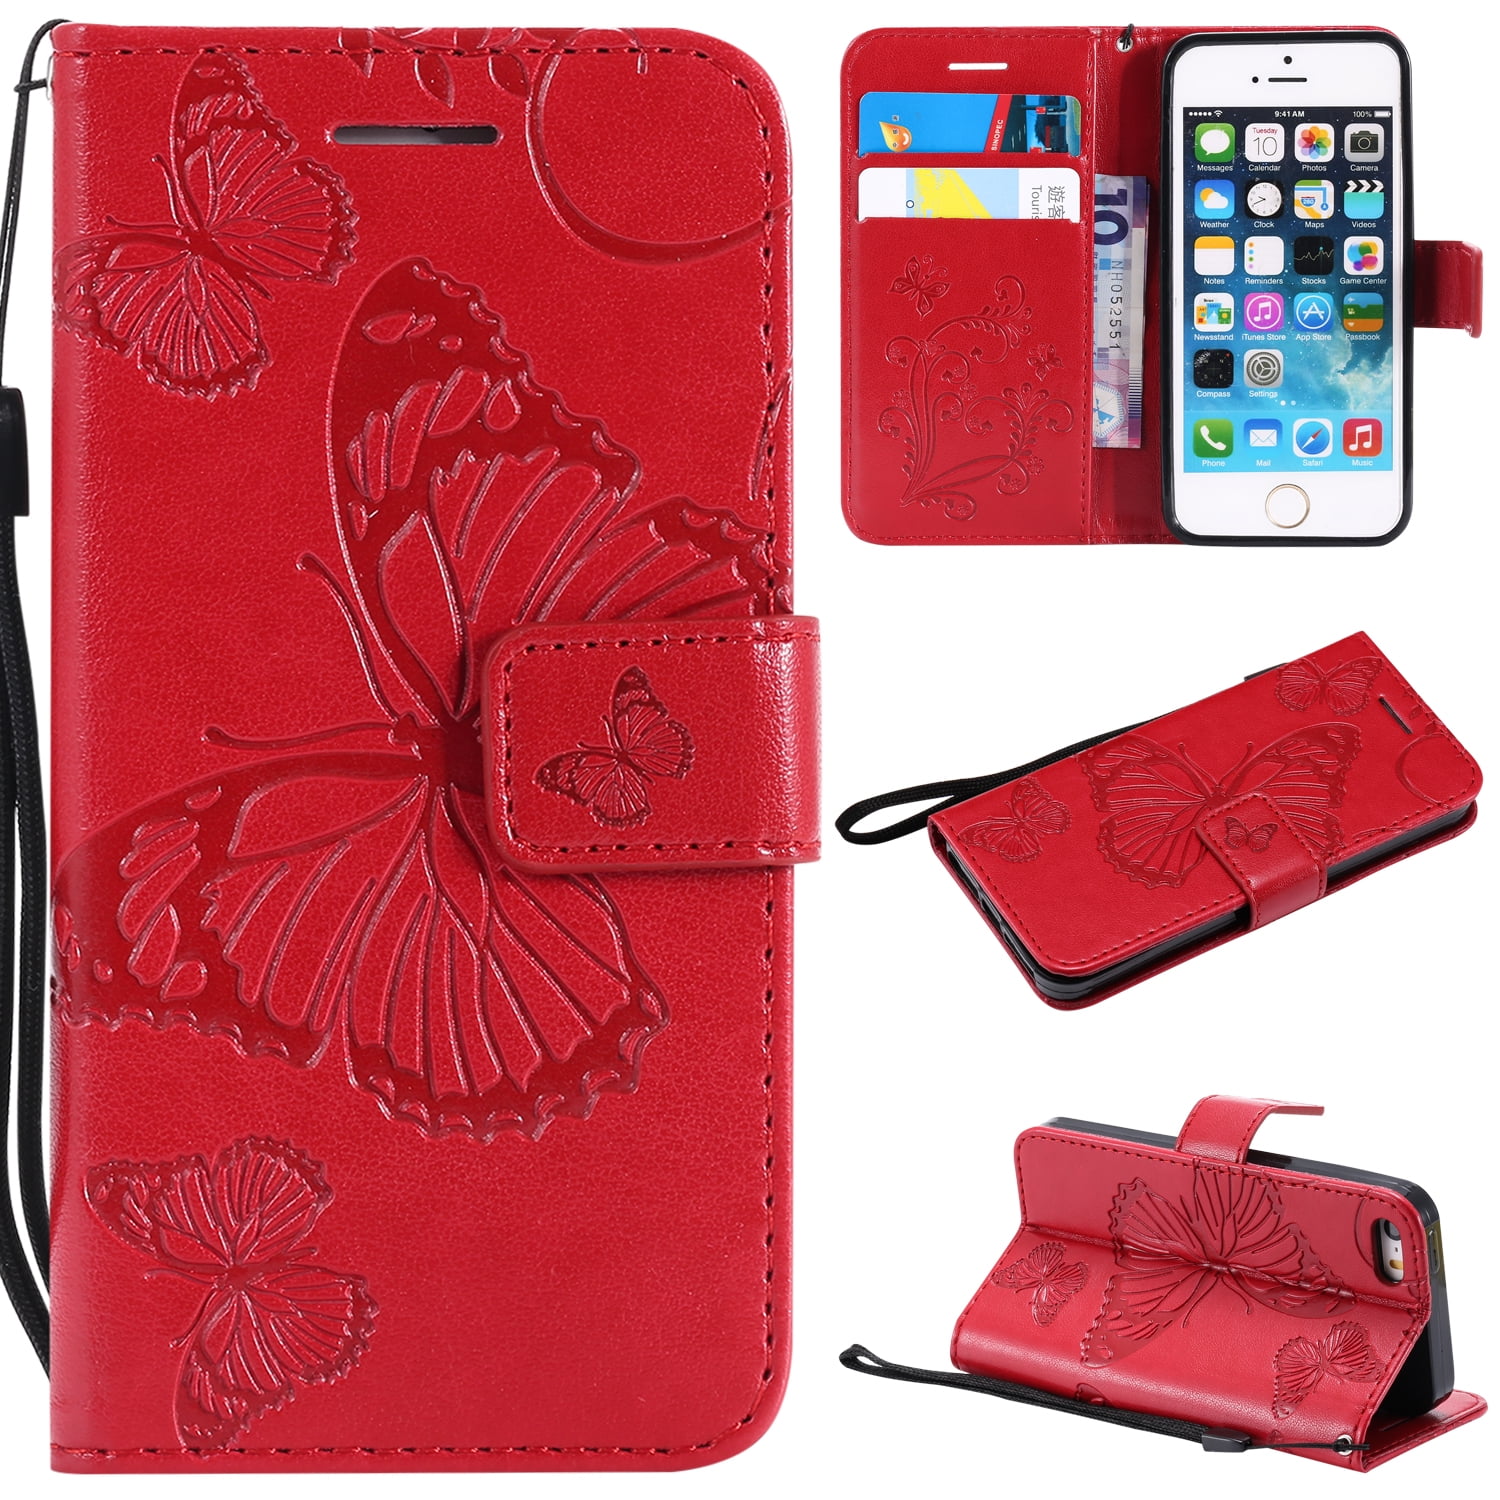 Bevriezen ontrouw Raap bladeren op iPhone 5S Case,iPhone 5 Case,iPhone SE(2016） Wallet case, Allytech Pretty  Retro Embossed Butterfly Flower Design Pu Leather Book Style Wallet Flip  Case Cover for Apple iPhone 5/ 5S /SE(2016）, Red - Walmart.com